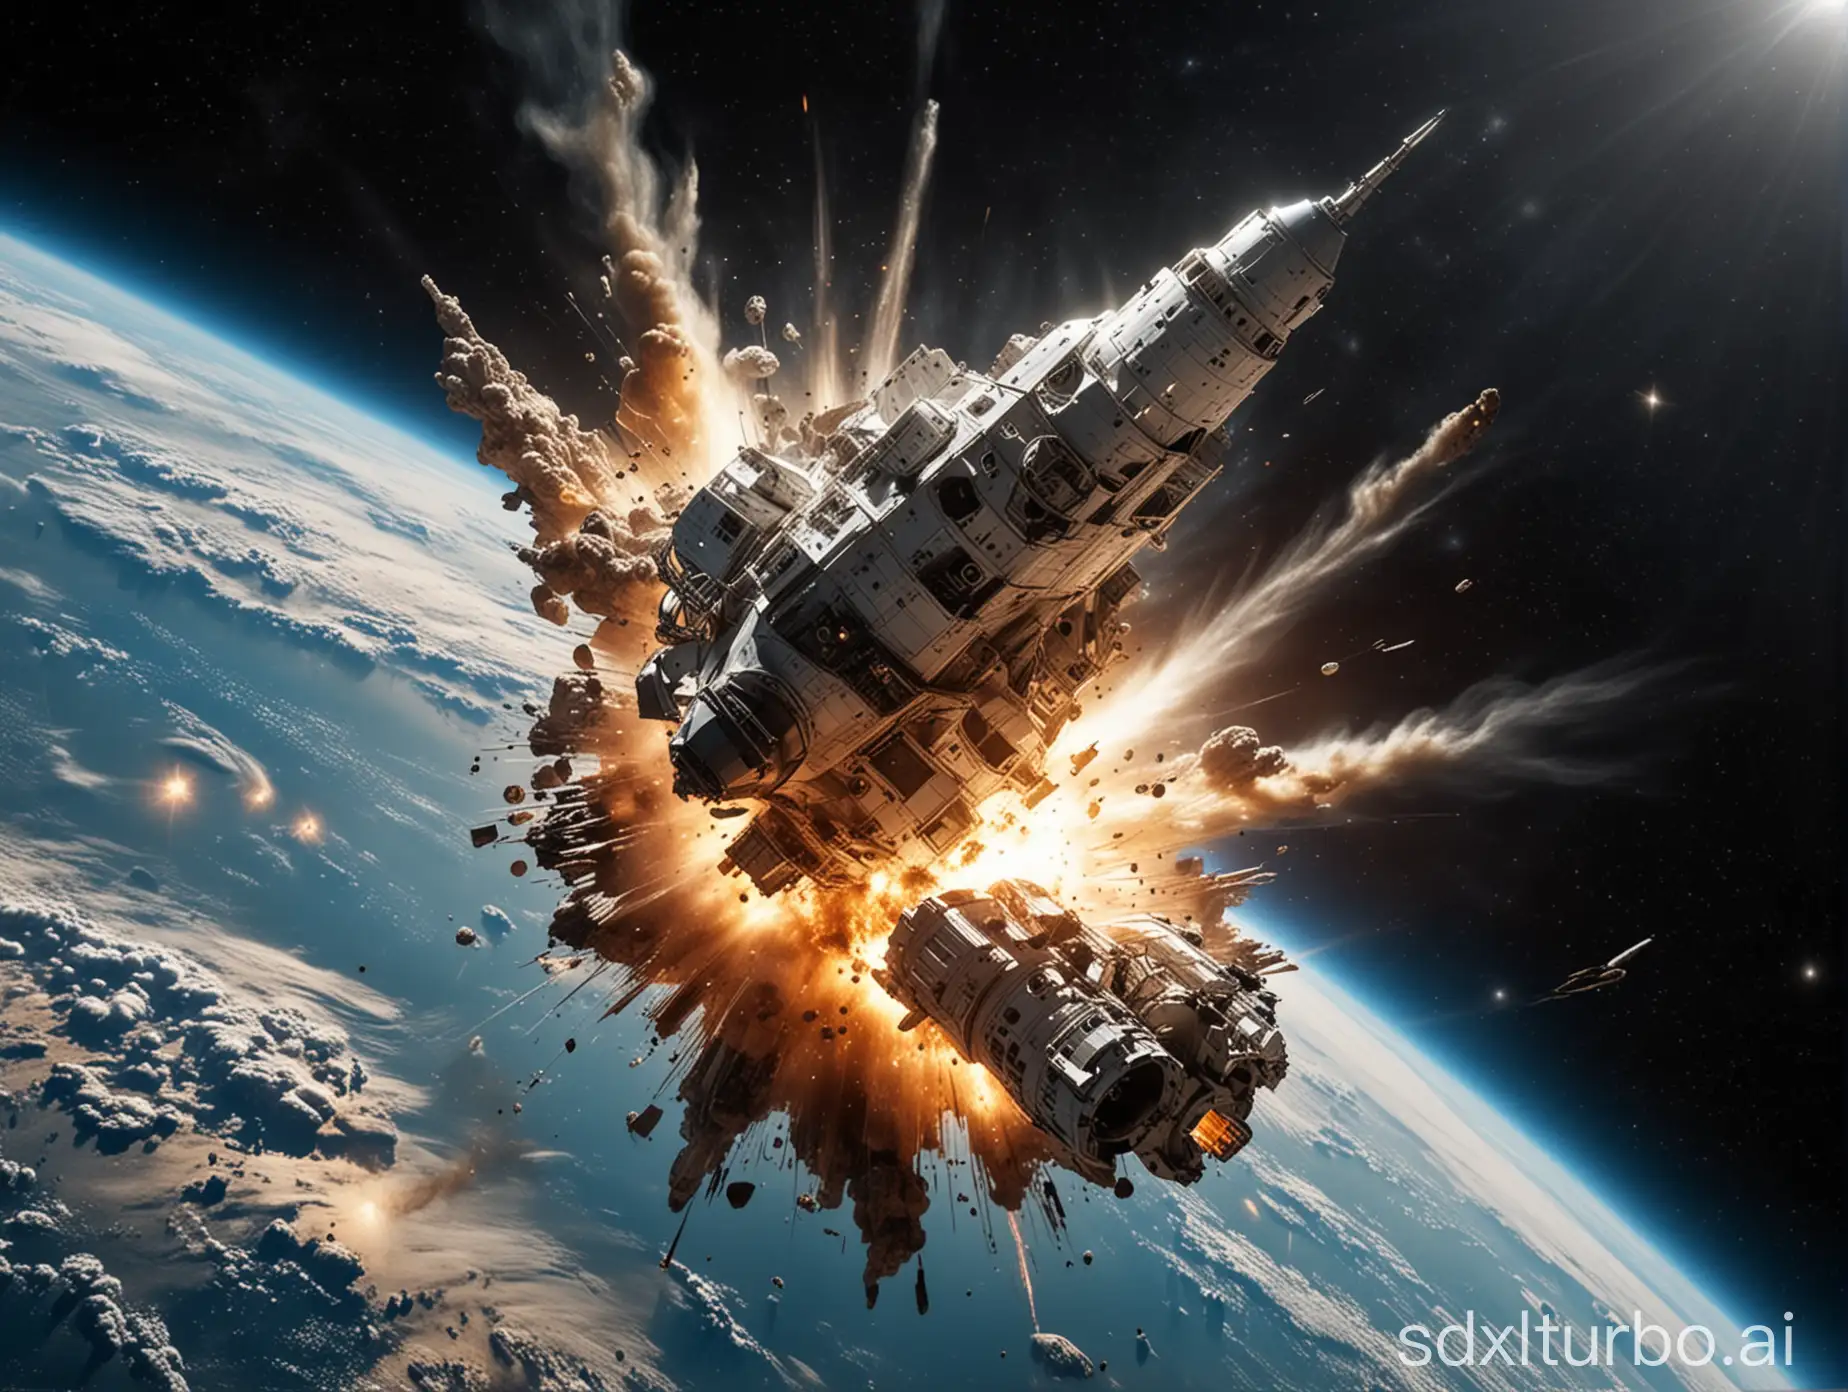 Explosion-of-War-of-God-Spacecraft-Debris-Scattered-in-Outer-Space